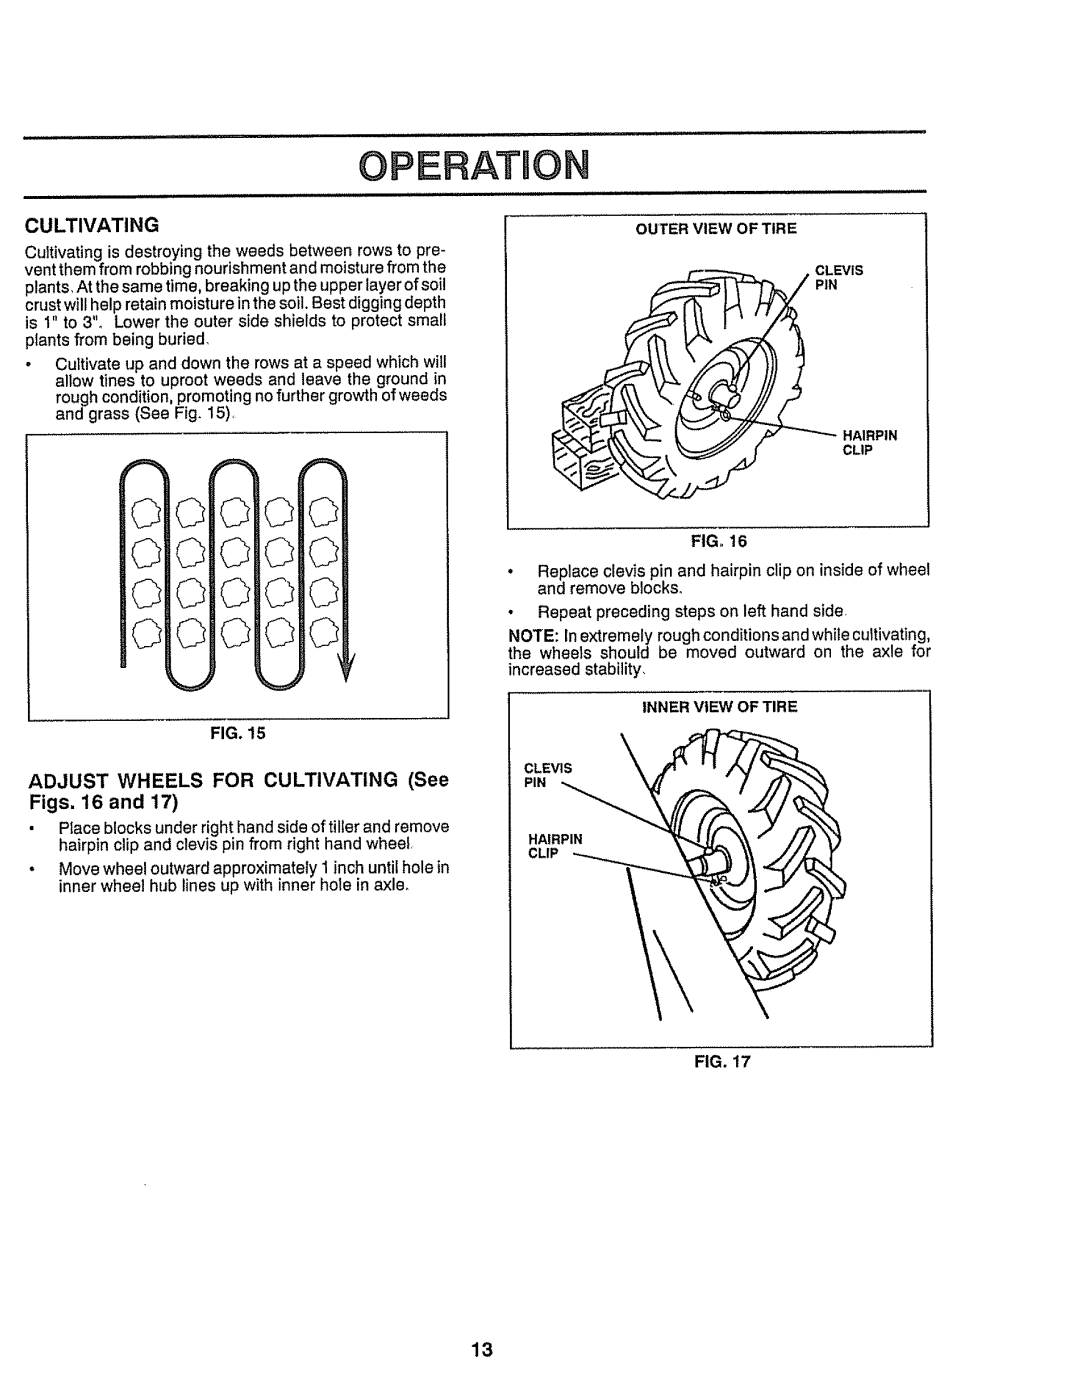 Craftsman 917-299751 owner manual Opebatuon, ADJUST WHEELS FOR CULTIVATING See, Figs. 16 and 